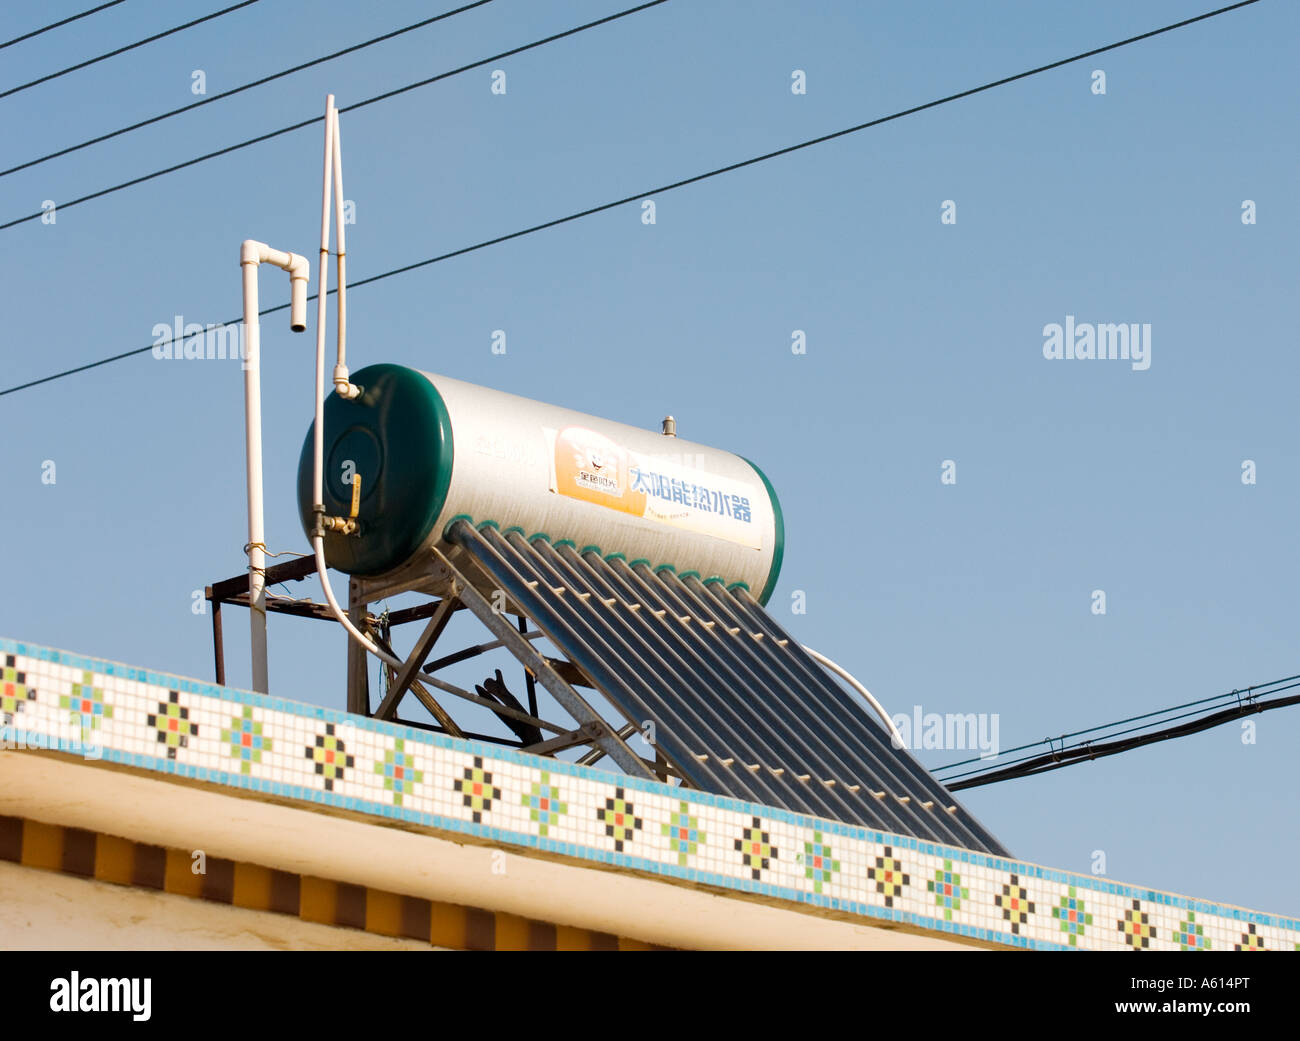 https://c8.alamy.com/comp/A614PT/solar-power-powered-hot-water-heater-tank-on-house-roof-in-rural-farming-A614PT.jpg